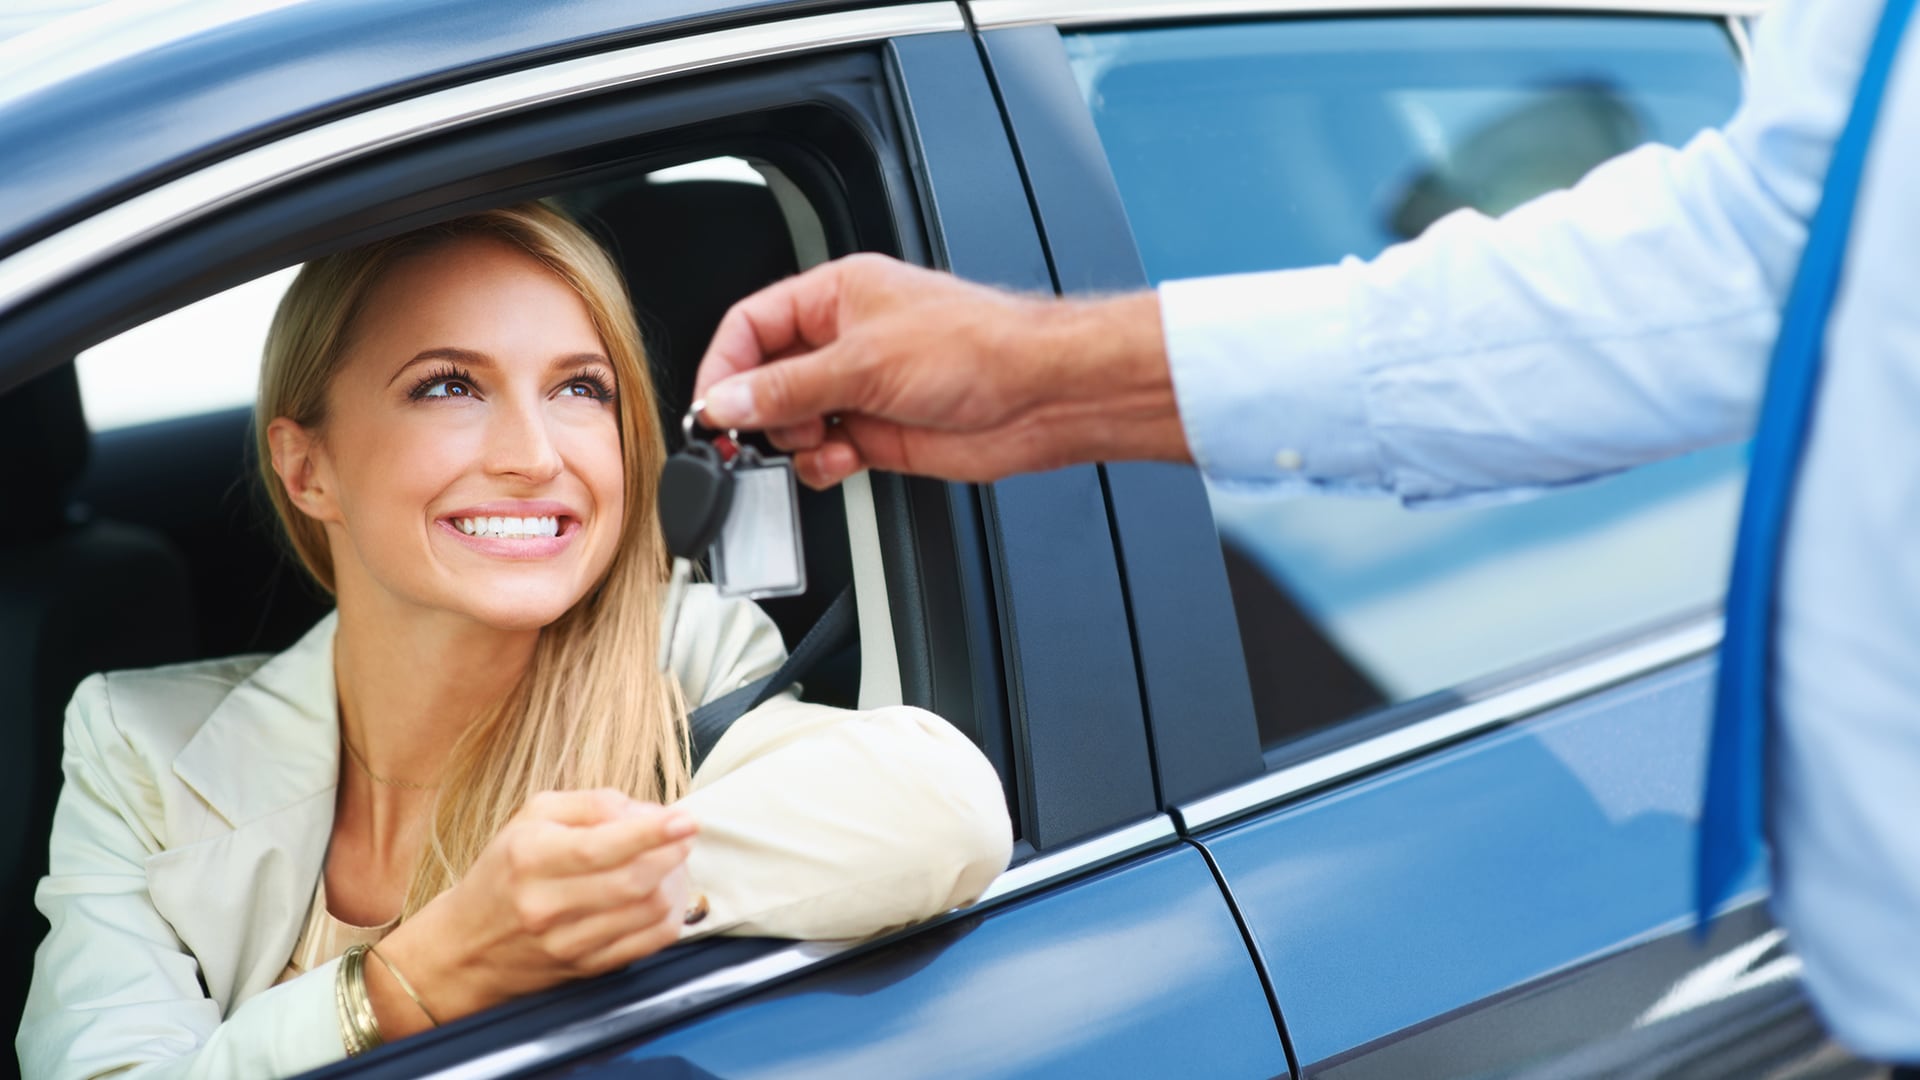 Who Pays for a Rental Car After An Accident? | Enterprise Rent-A-Car